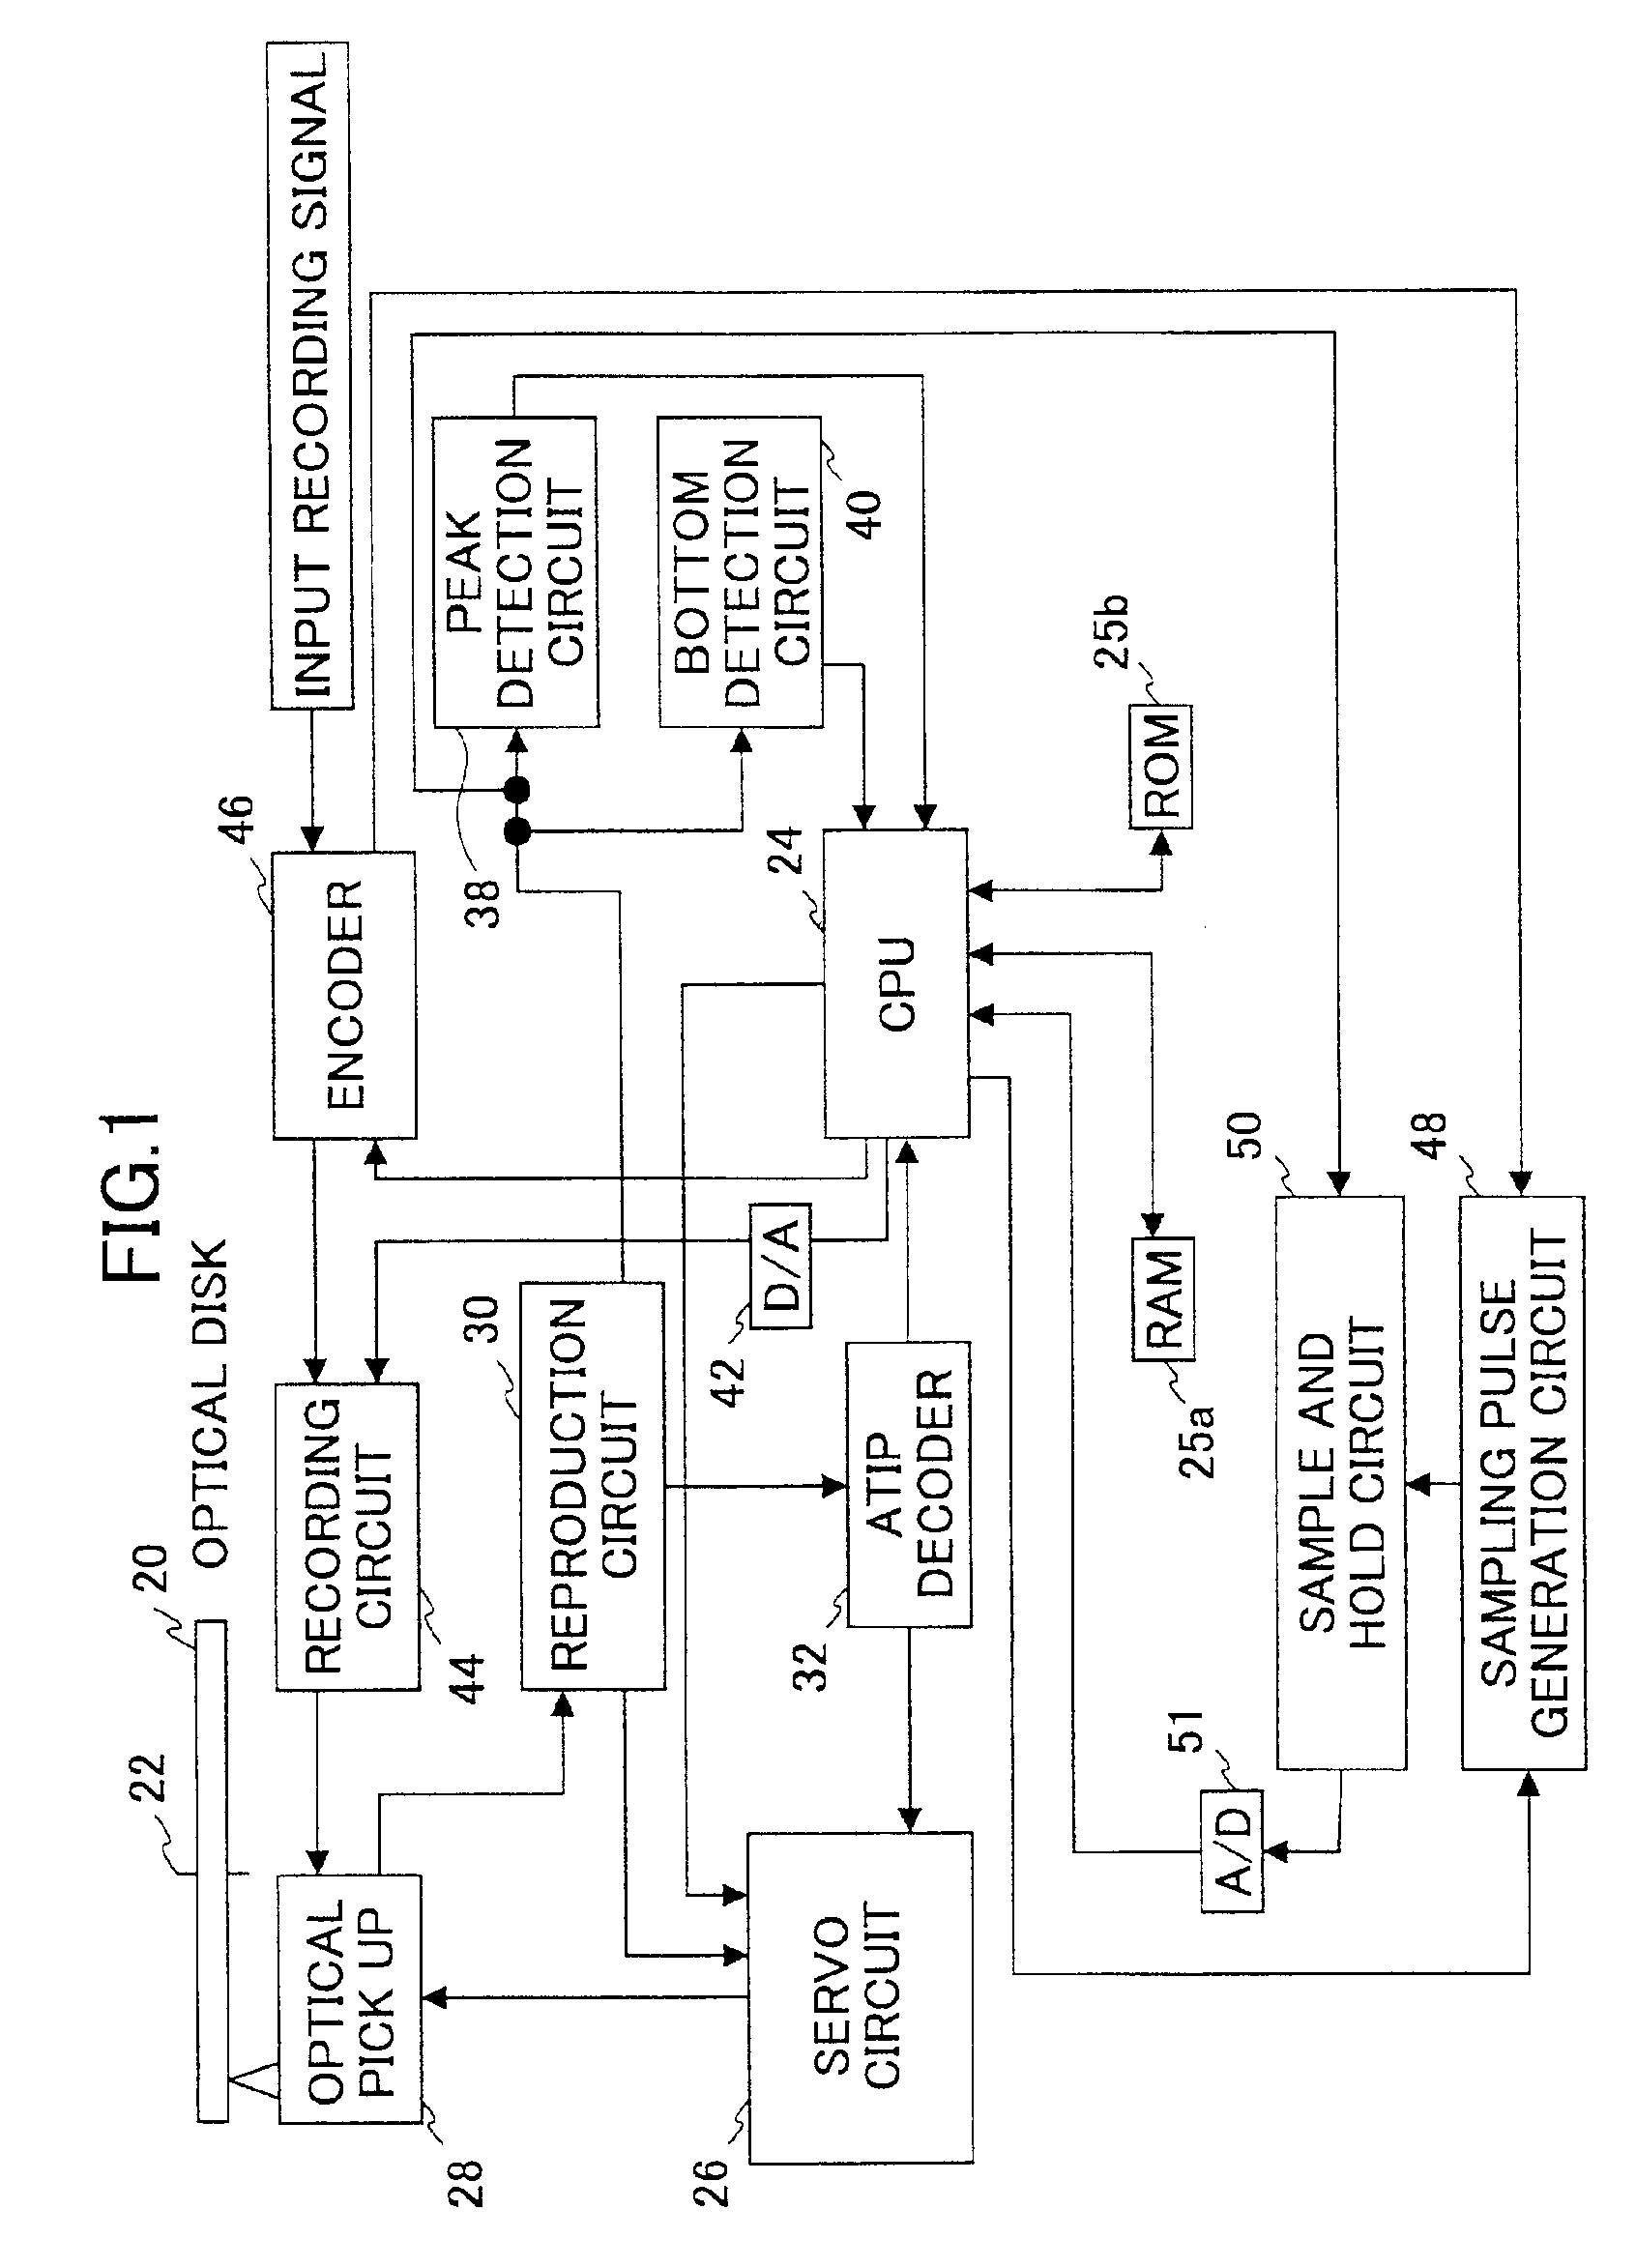 Optical disc drive having OPC control unit for controlling the level of power of the laser beam for recording and reading data from an optical disc